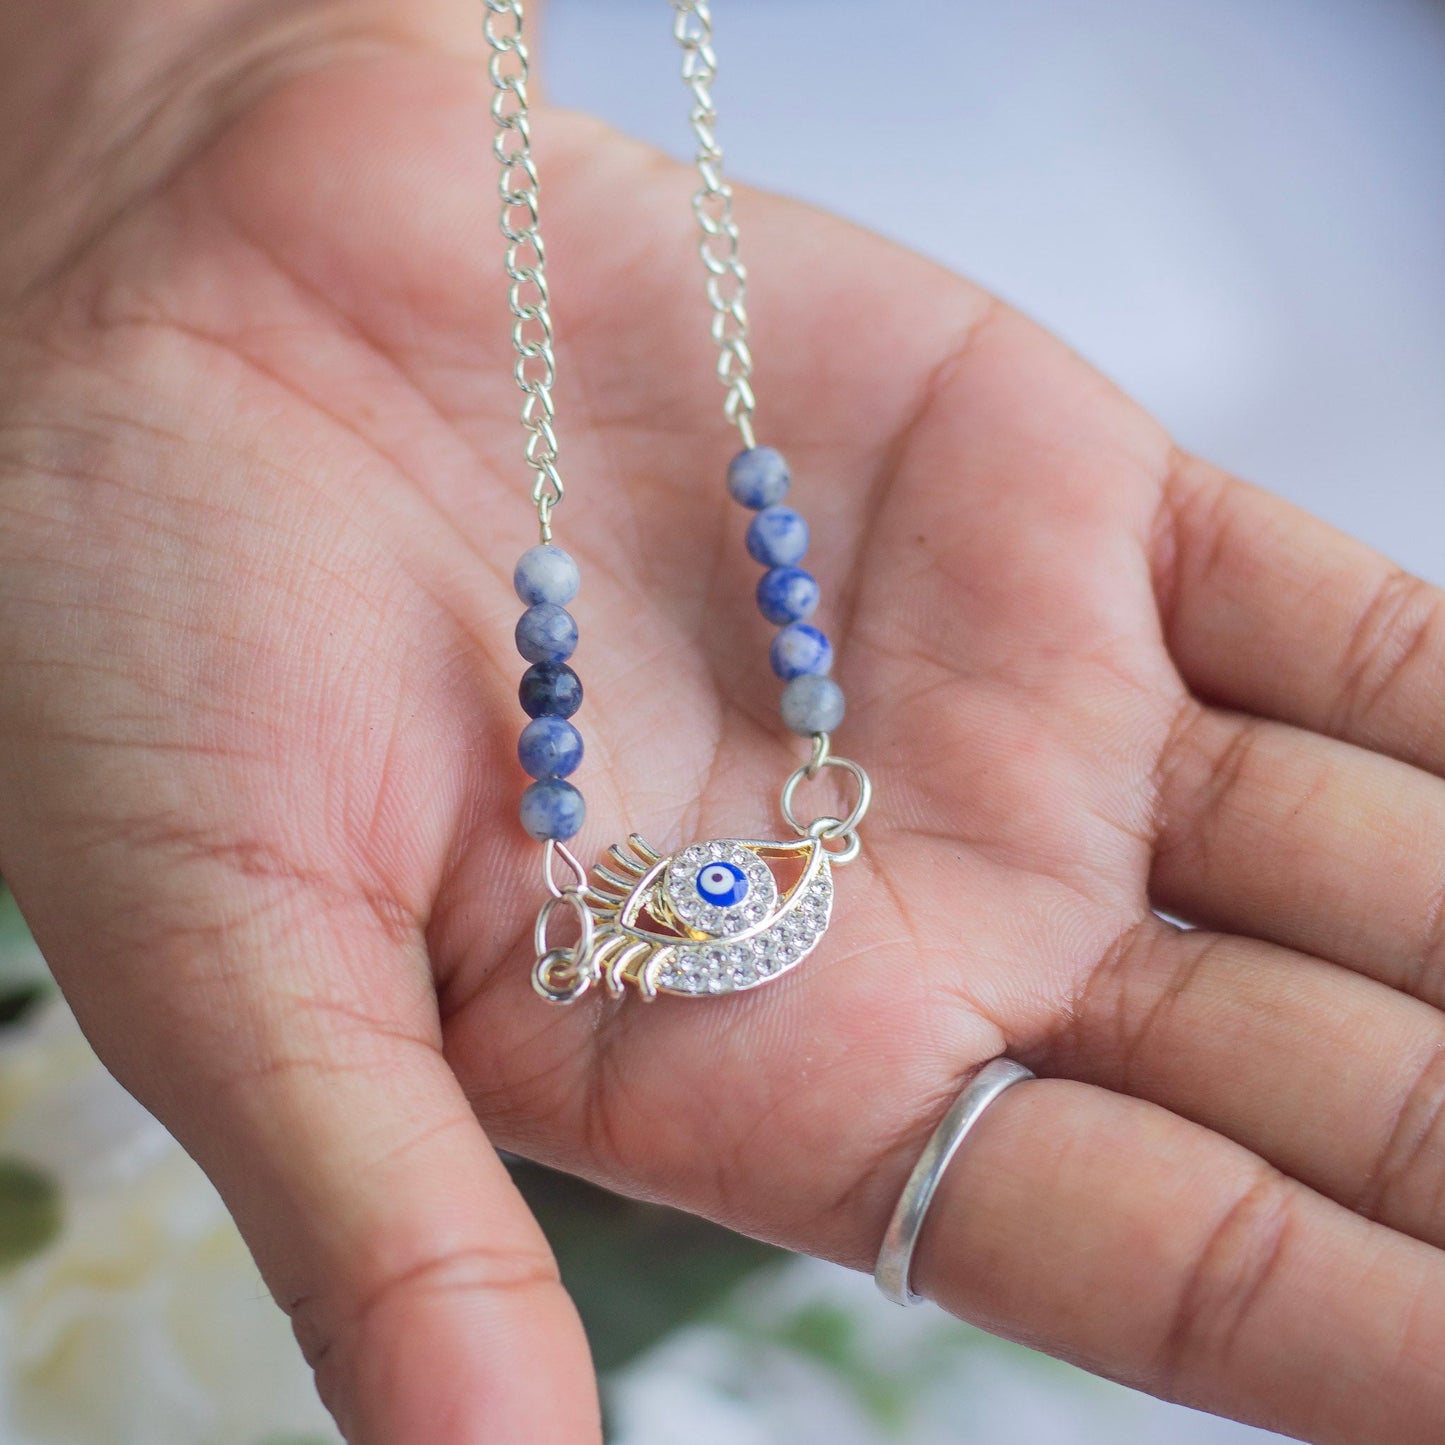 Sodalite with evil eye charm Necklace